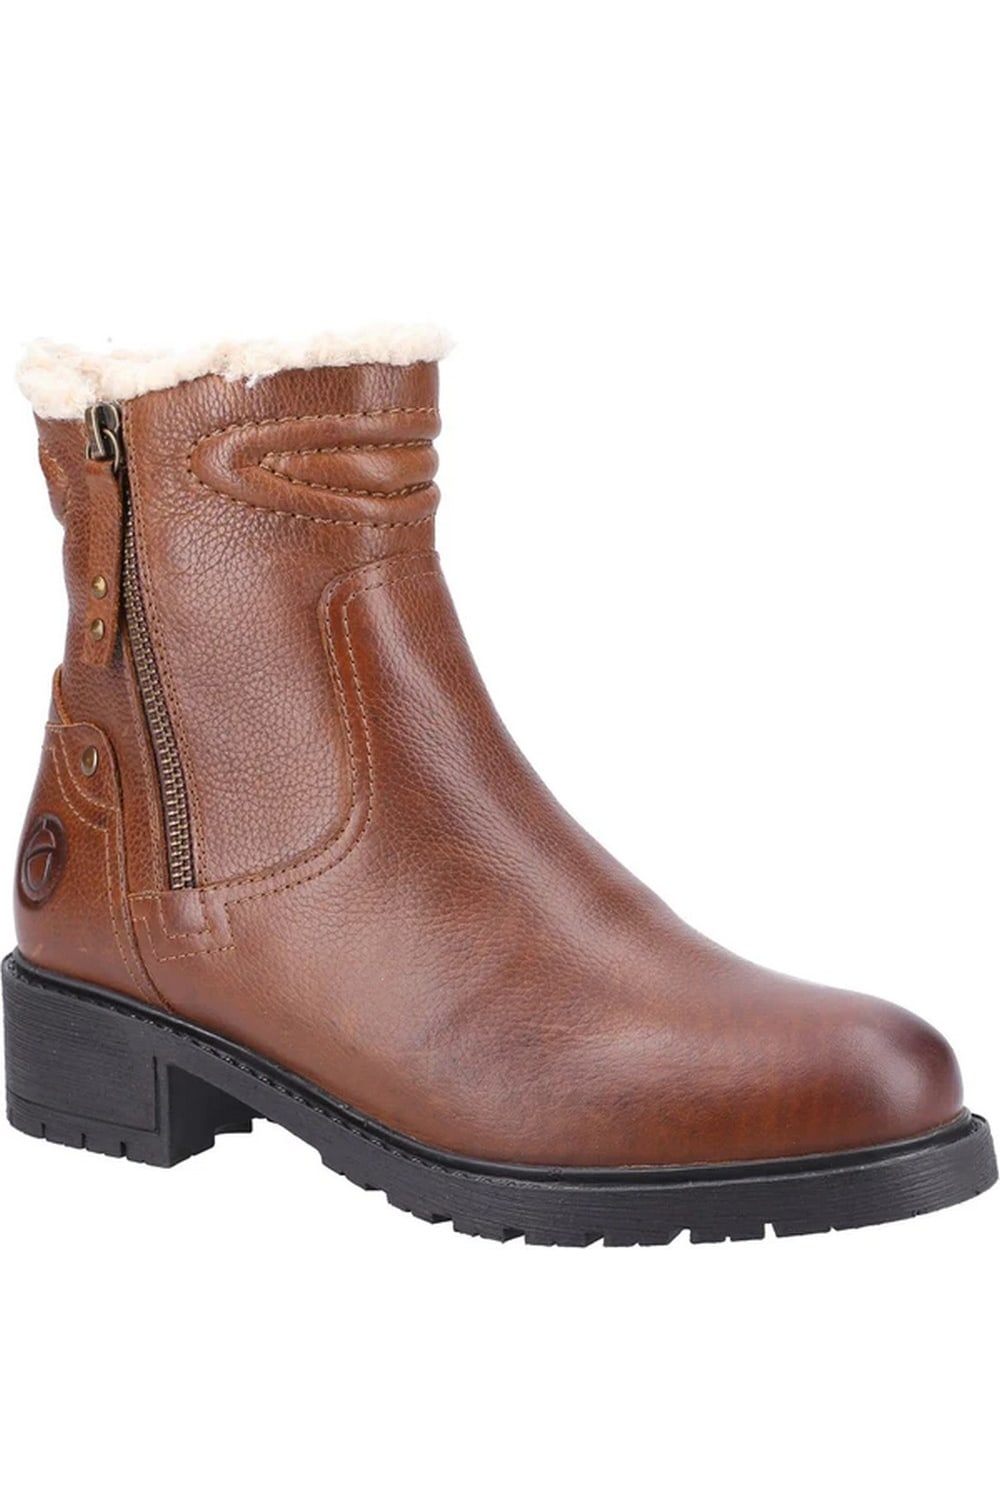 Womens/Ladies Gloucester Leather Ankle Boots - Brown